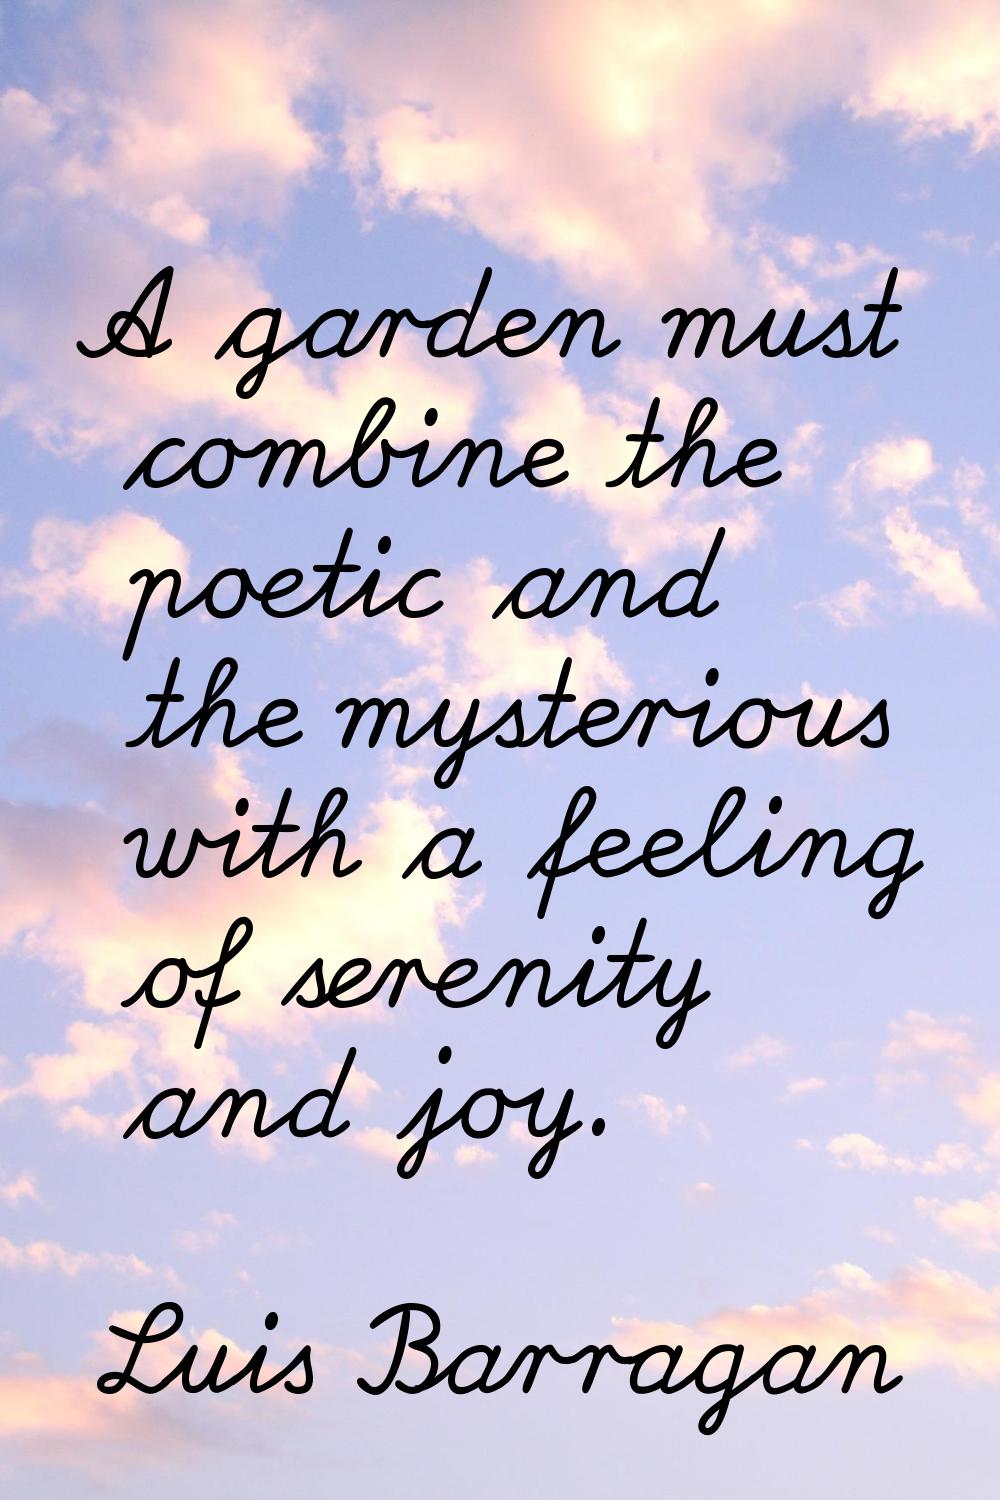 A garden must combine the poetic and the mysterious with a feeling of serenity and joy.